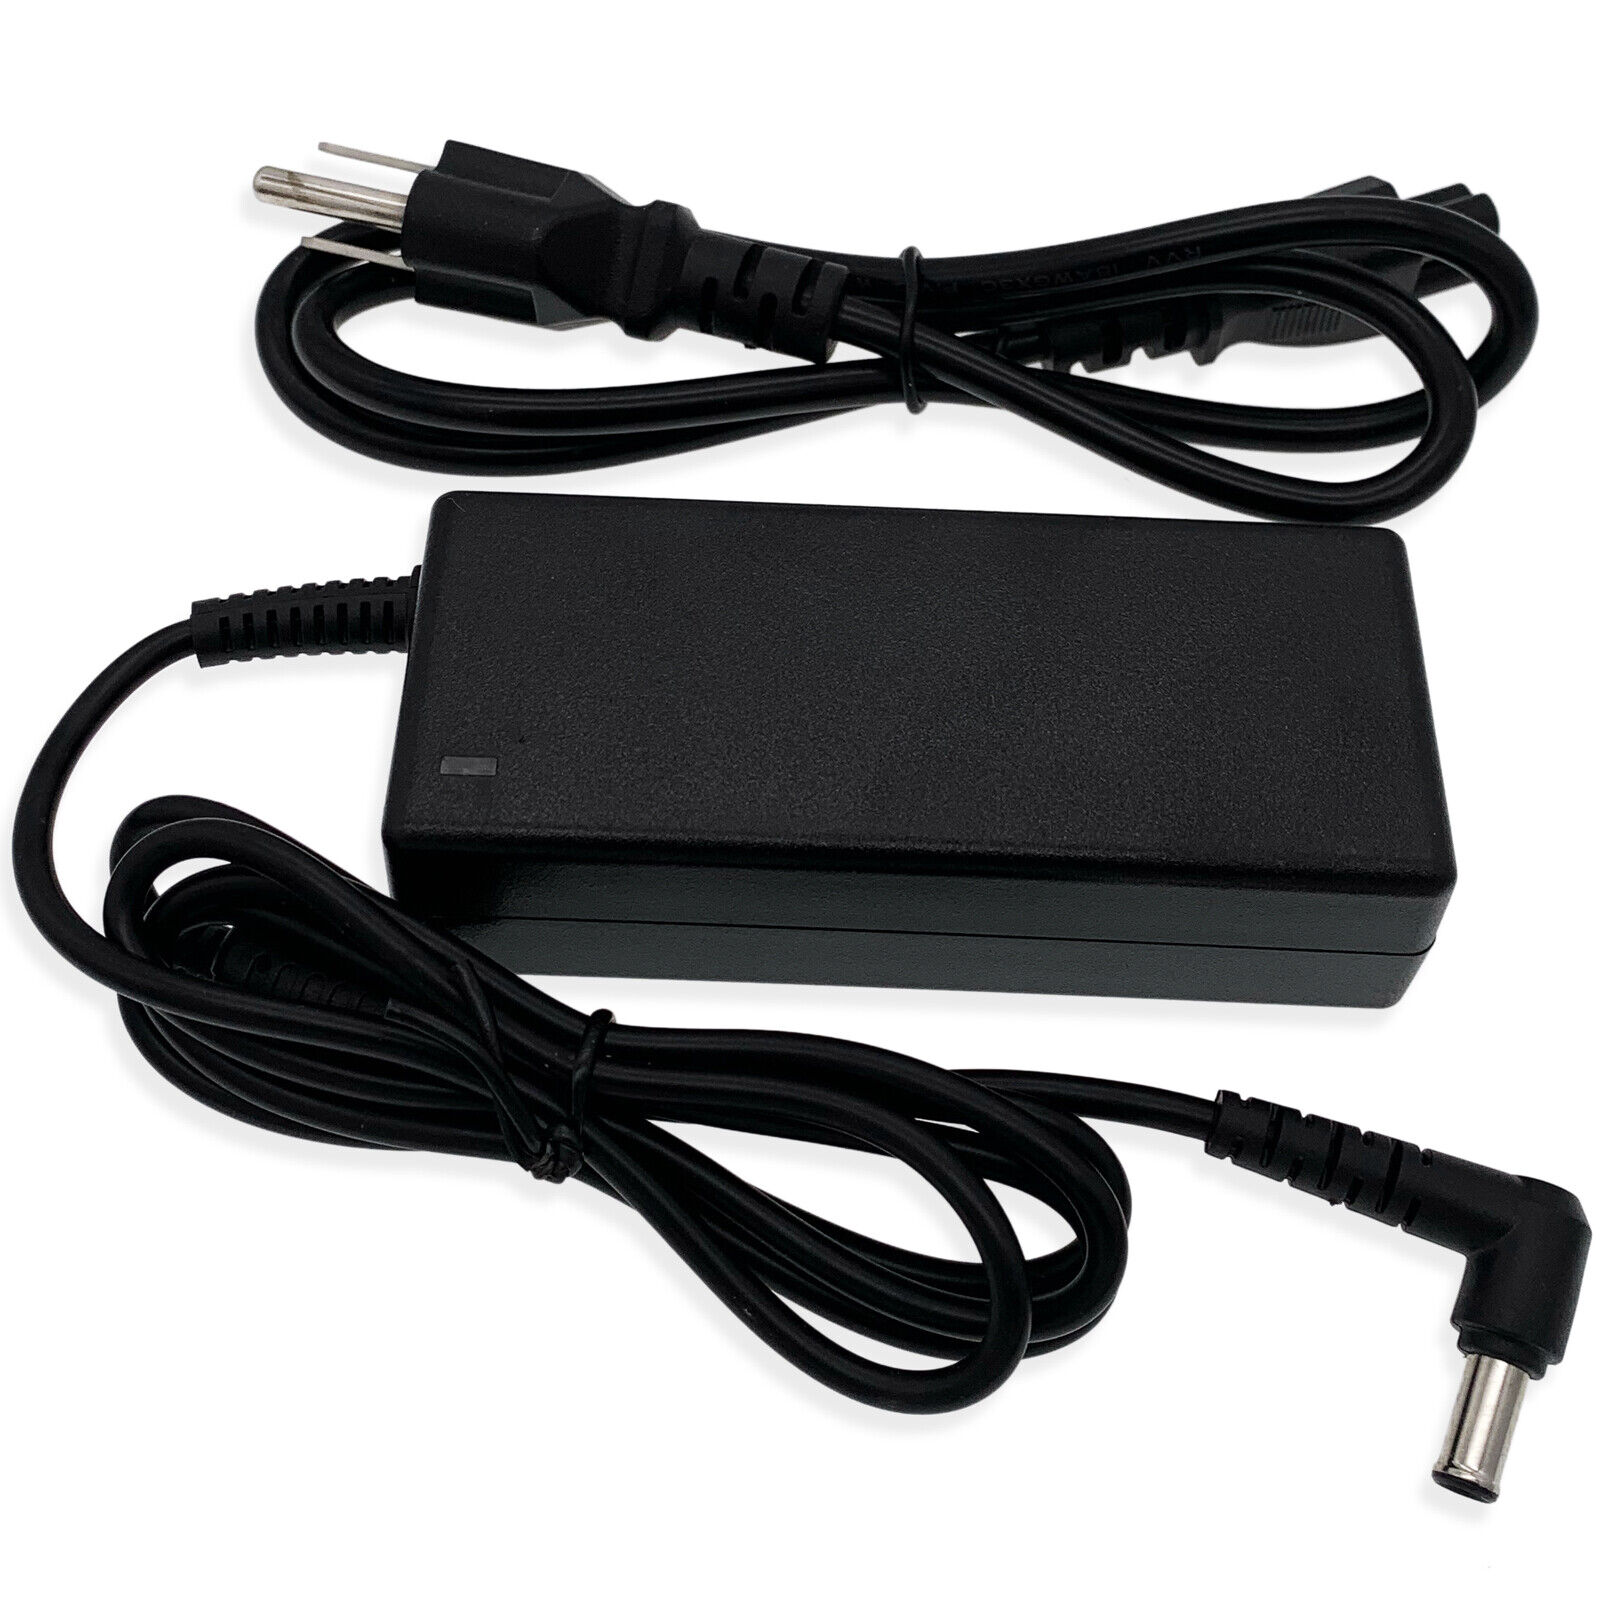 AC Adapter For Samsung SyncMaster S22B150N S22B150B LED LCD Charger Power Supply